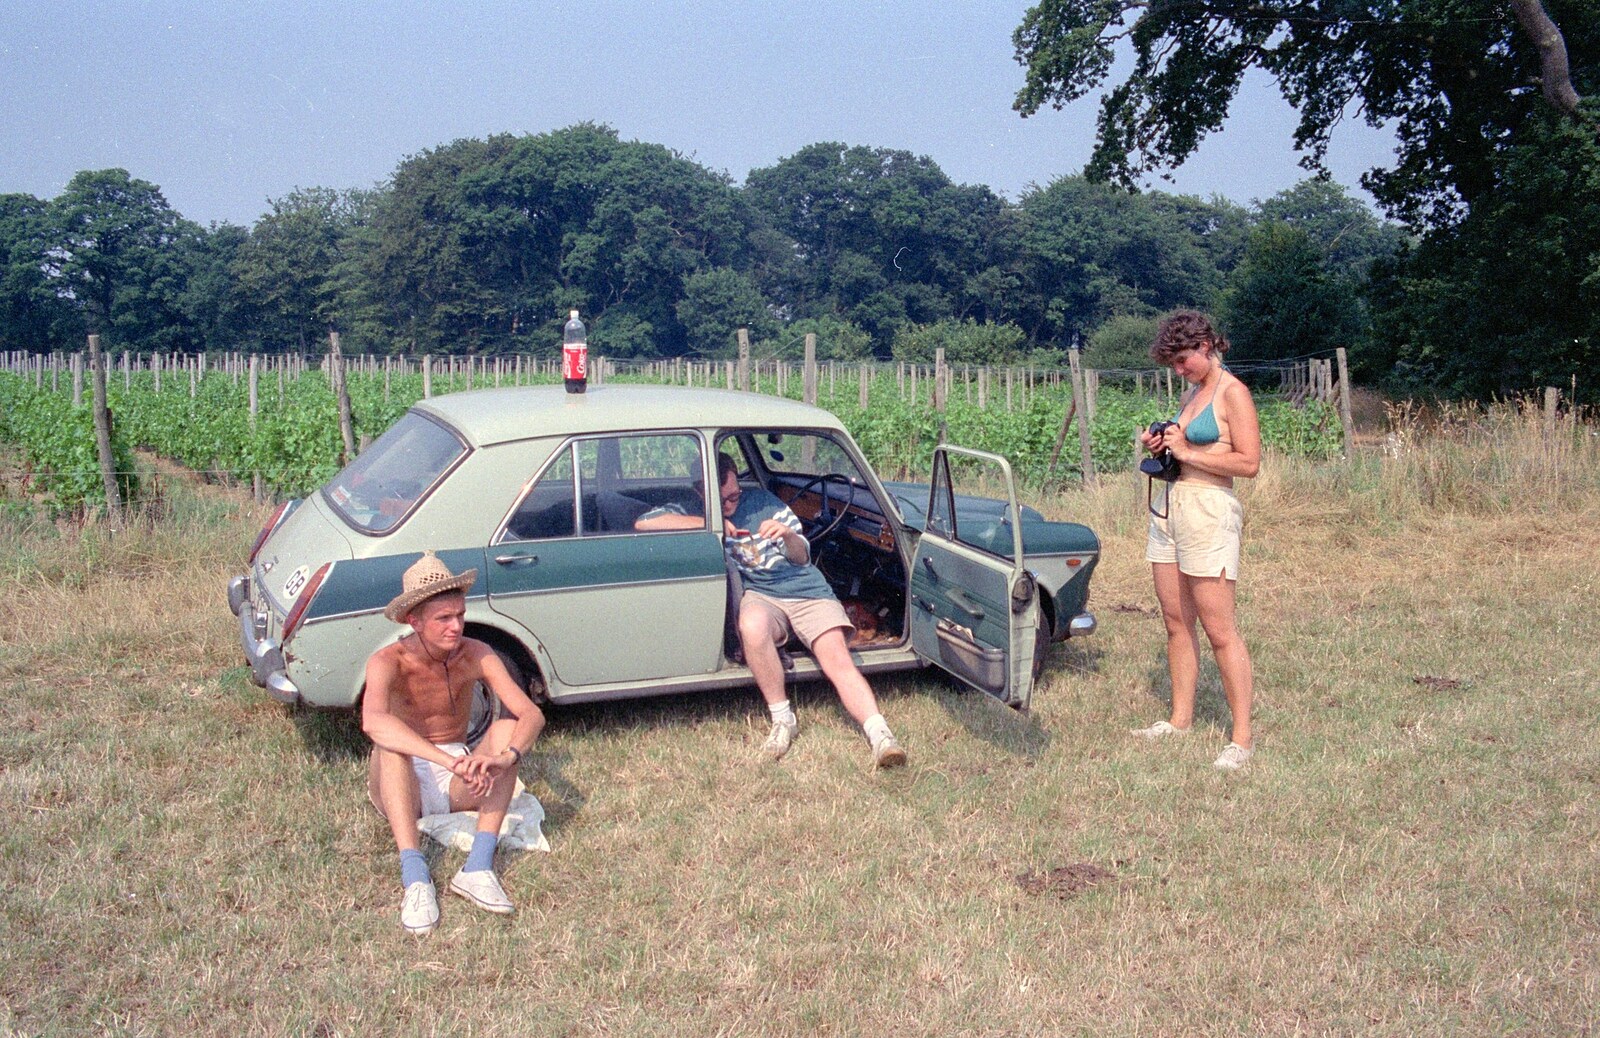 Nosher, Hamish and Angela and Phil's car from Back From Uni: Summer Pruning, Bransgore, Dorset - 25th July 1989